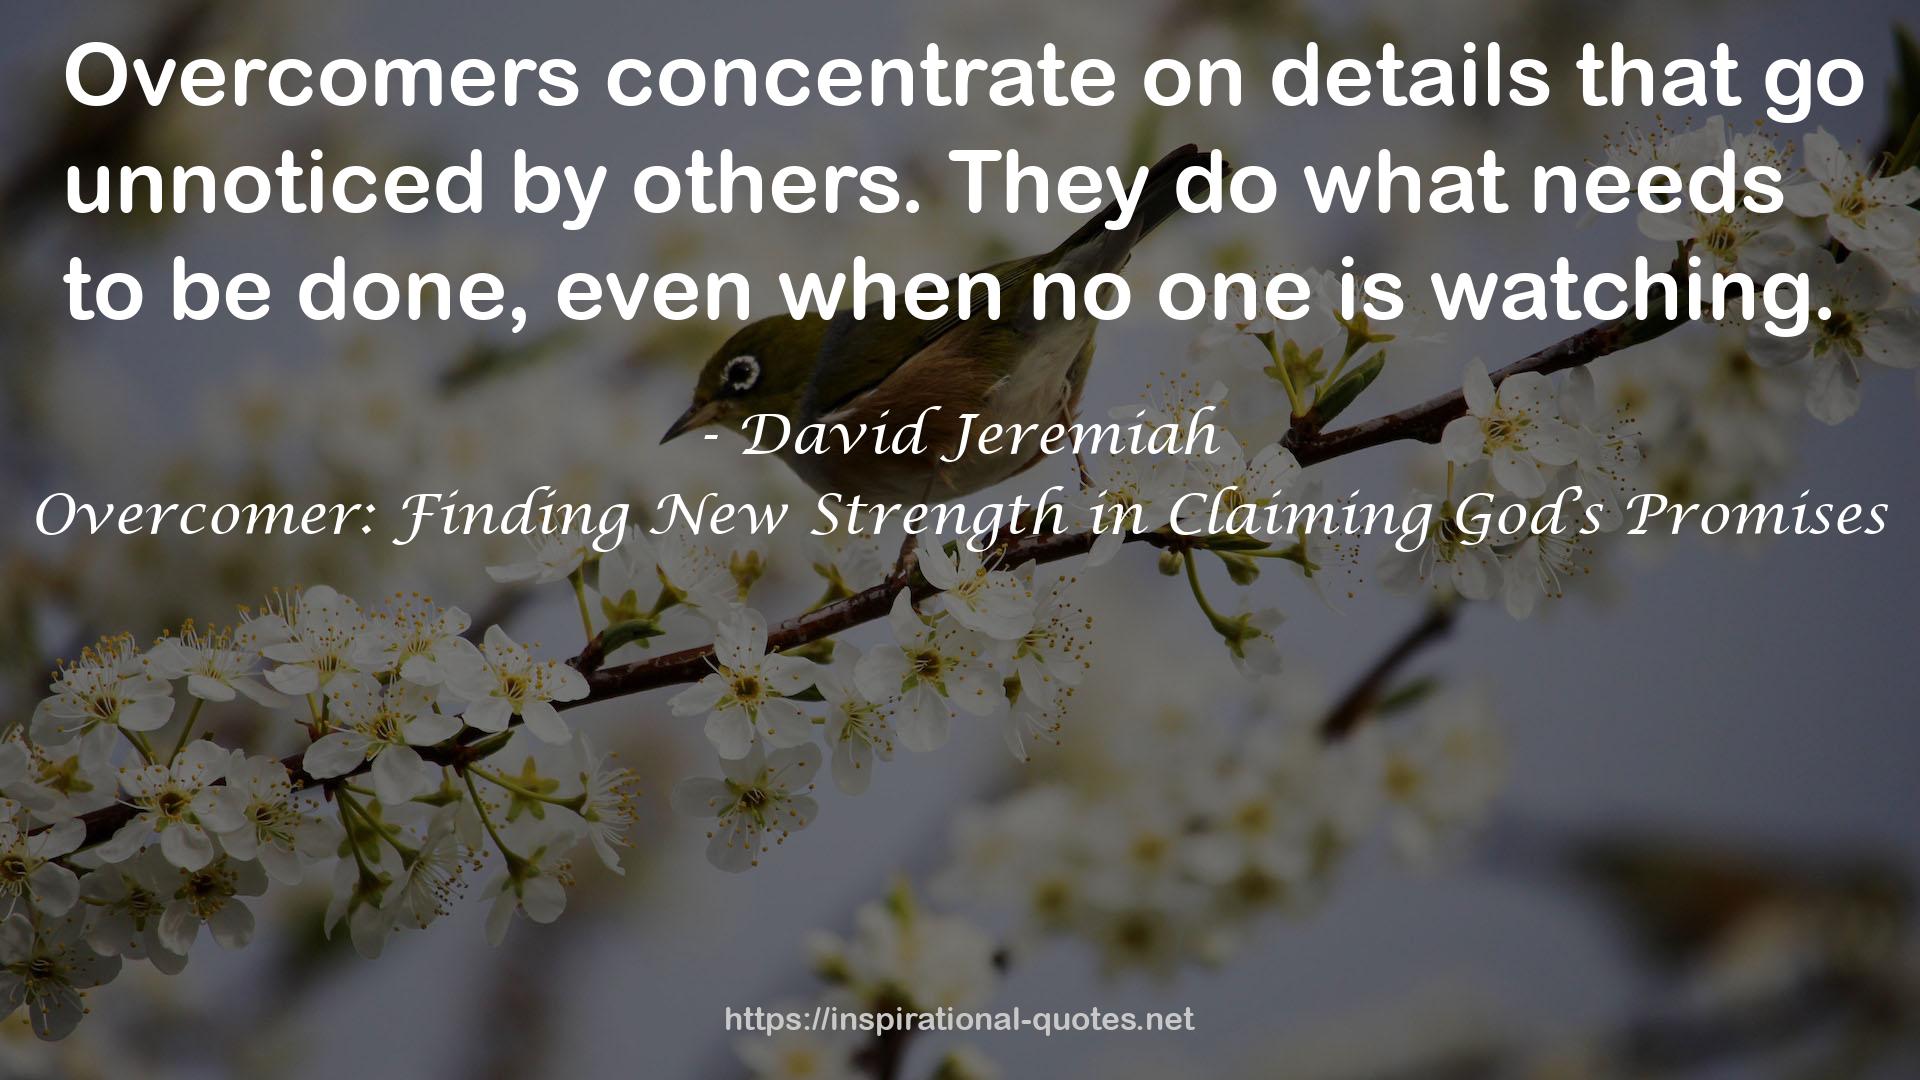 Overcomer: Finding New Strength in Claiming God’s Promises QUOTES